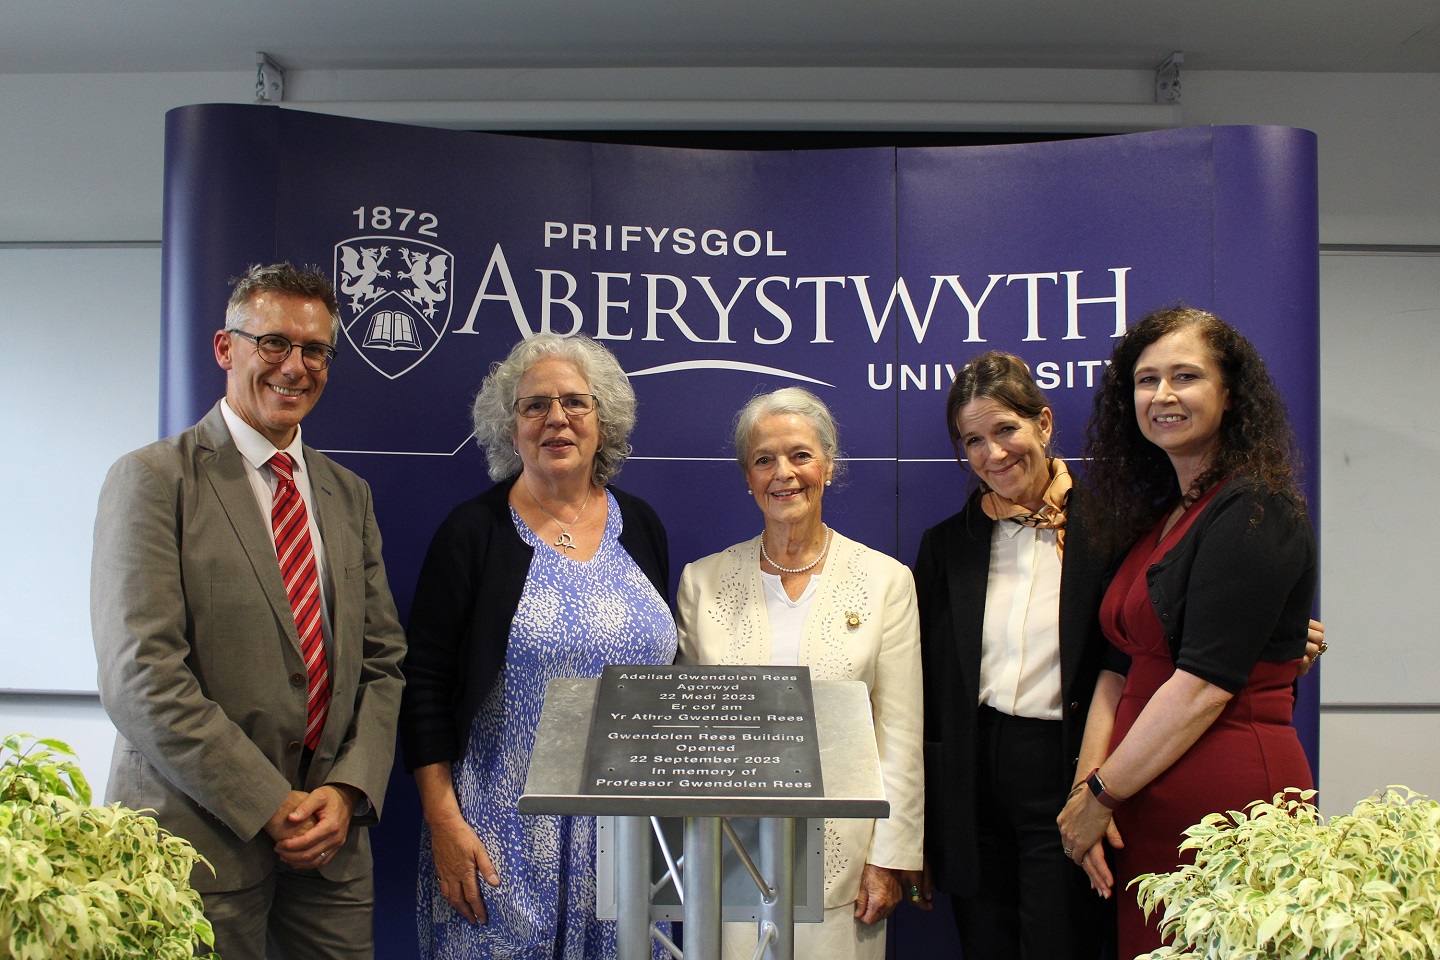 Unveiling of the official plaque to Prof Rees with Professor Iain Barber, Professor Elizabeth Treasure, Katherine Childs, Jane Hankin and Professor Joanne Hamilton.